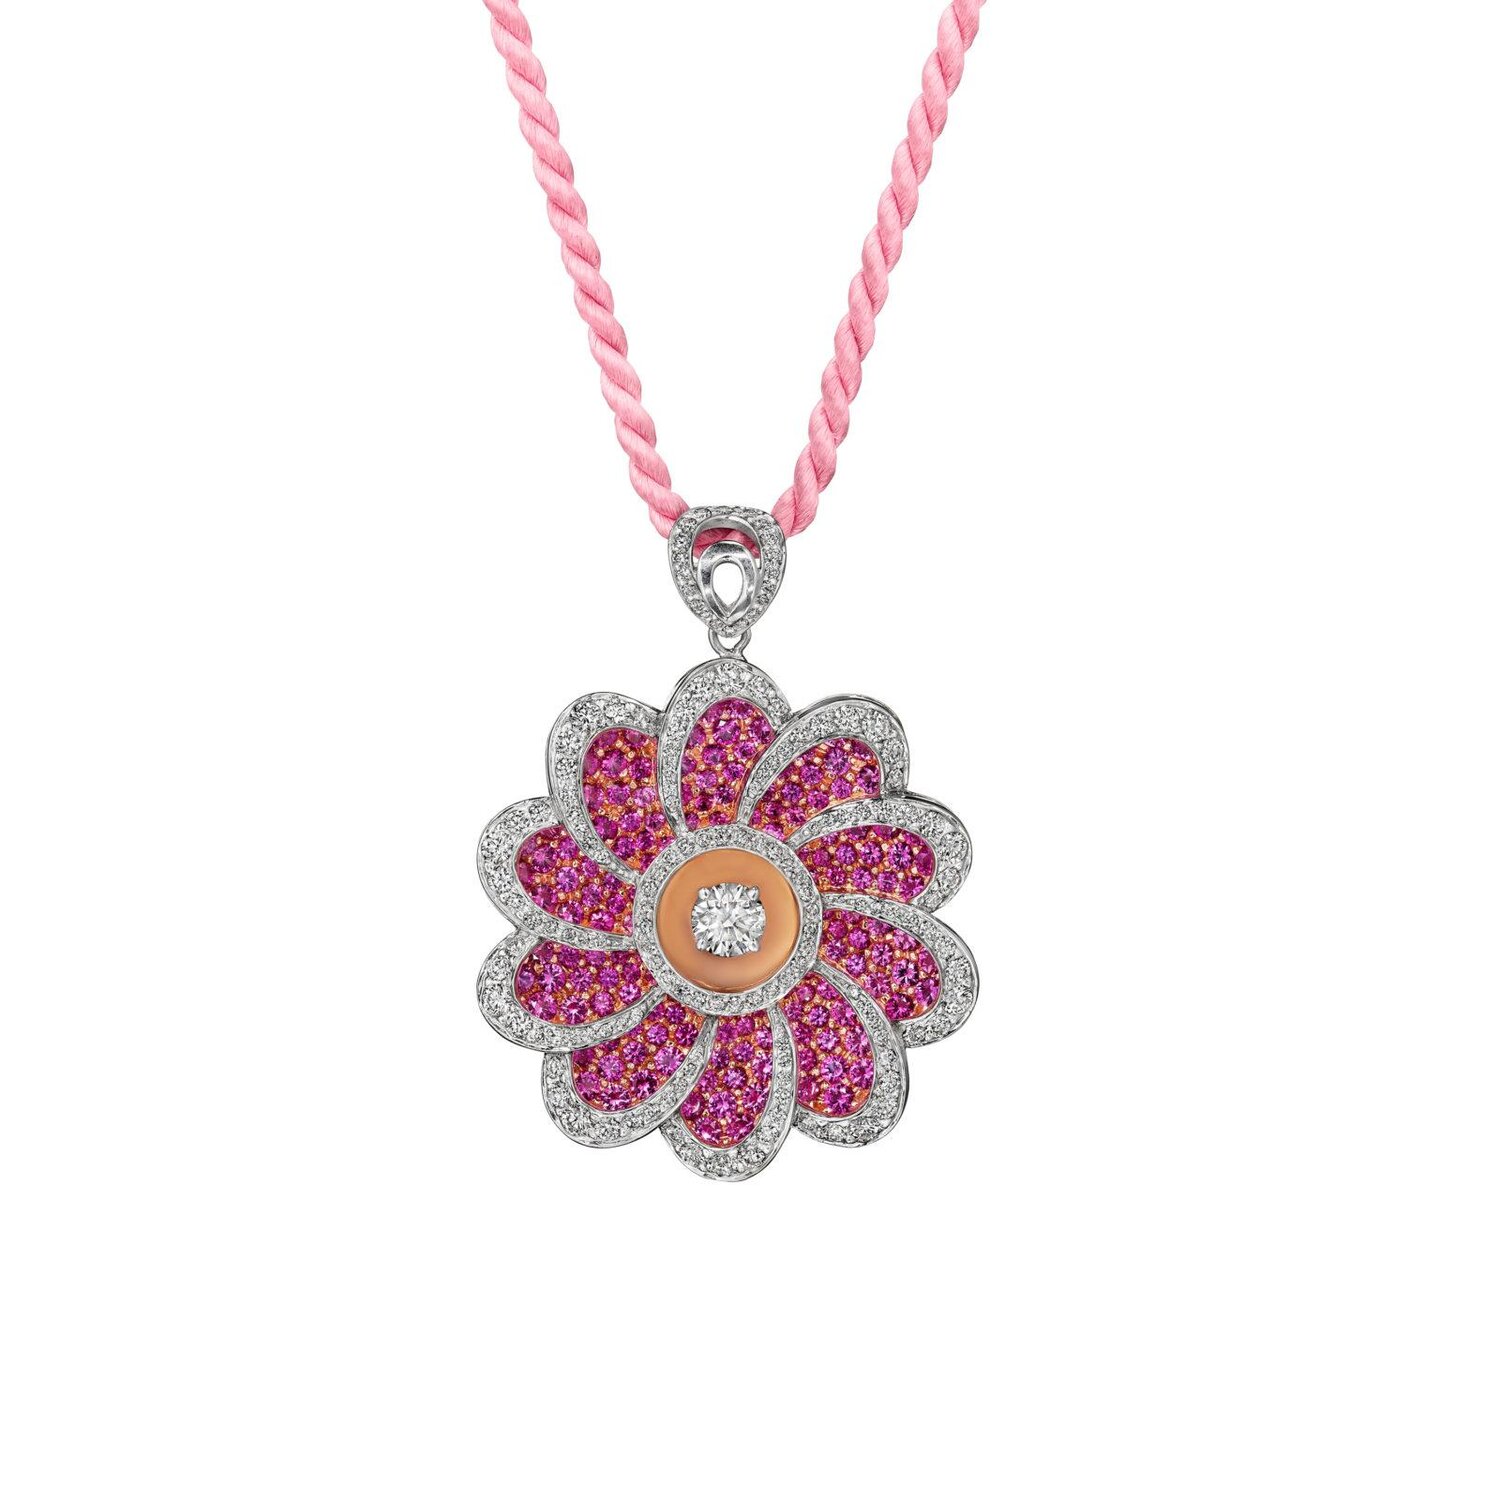 Mosaic Pink Sapphire and Diamond Flower Pendant in 14k Rose Gold (22 in)